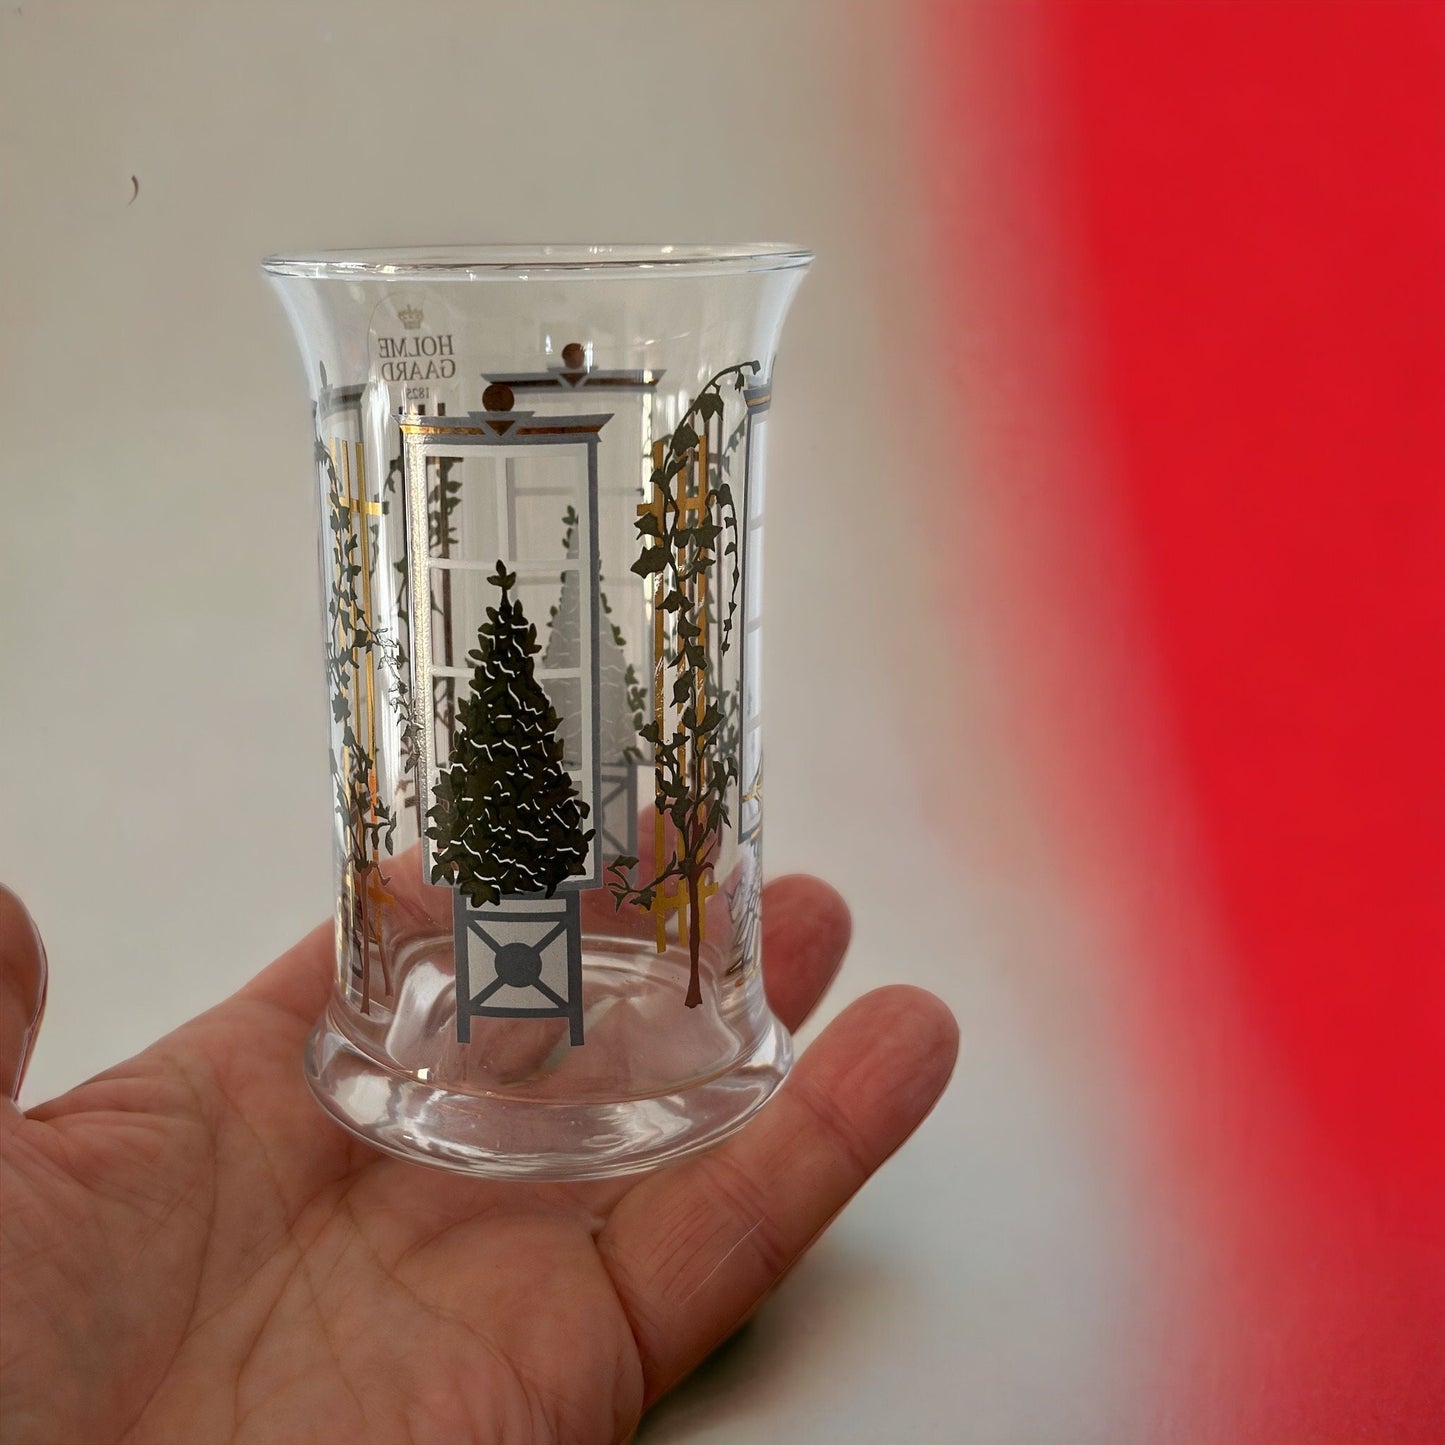 Holmegaard, Golden Christmas, Christmas Water Glass. Designed by Michael Bang and Jette Frölich